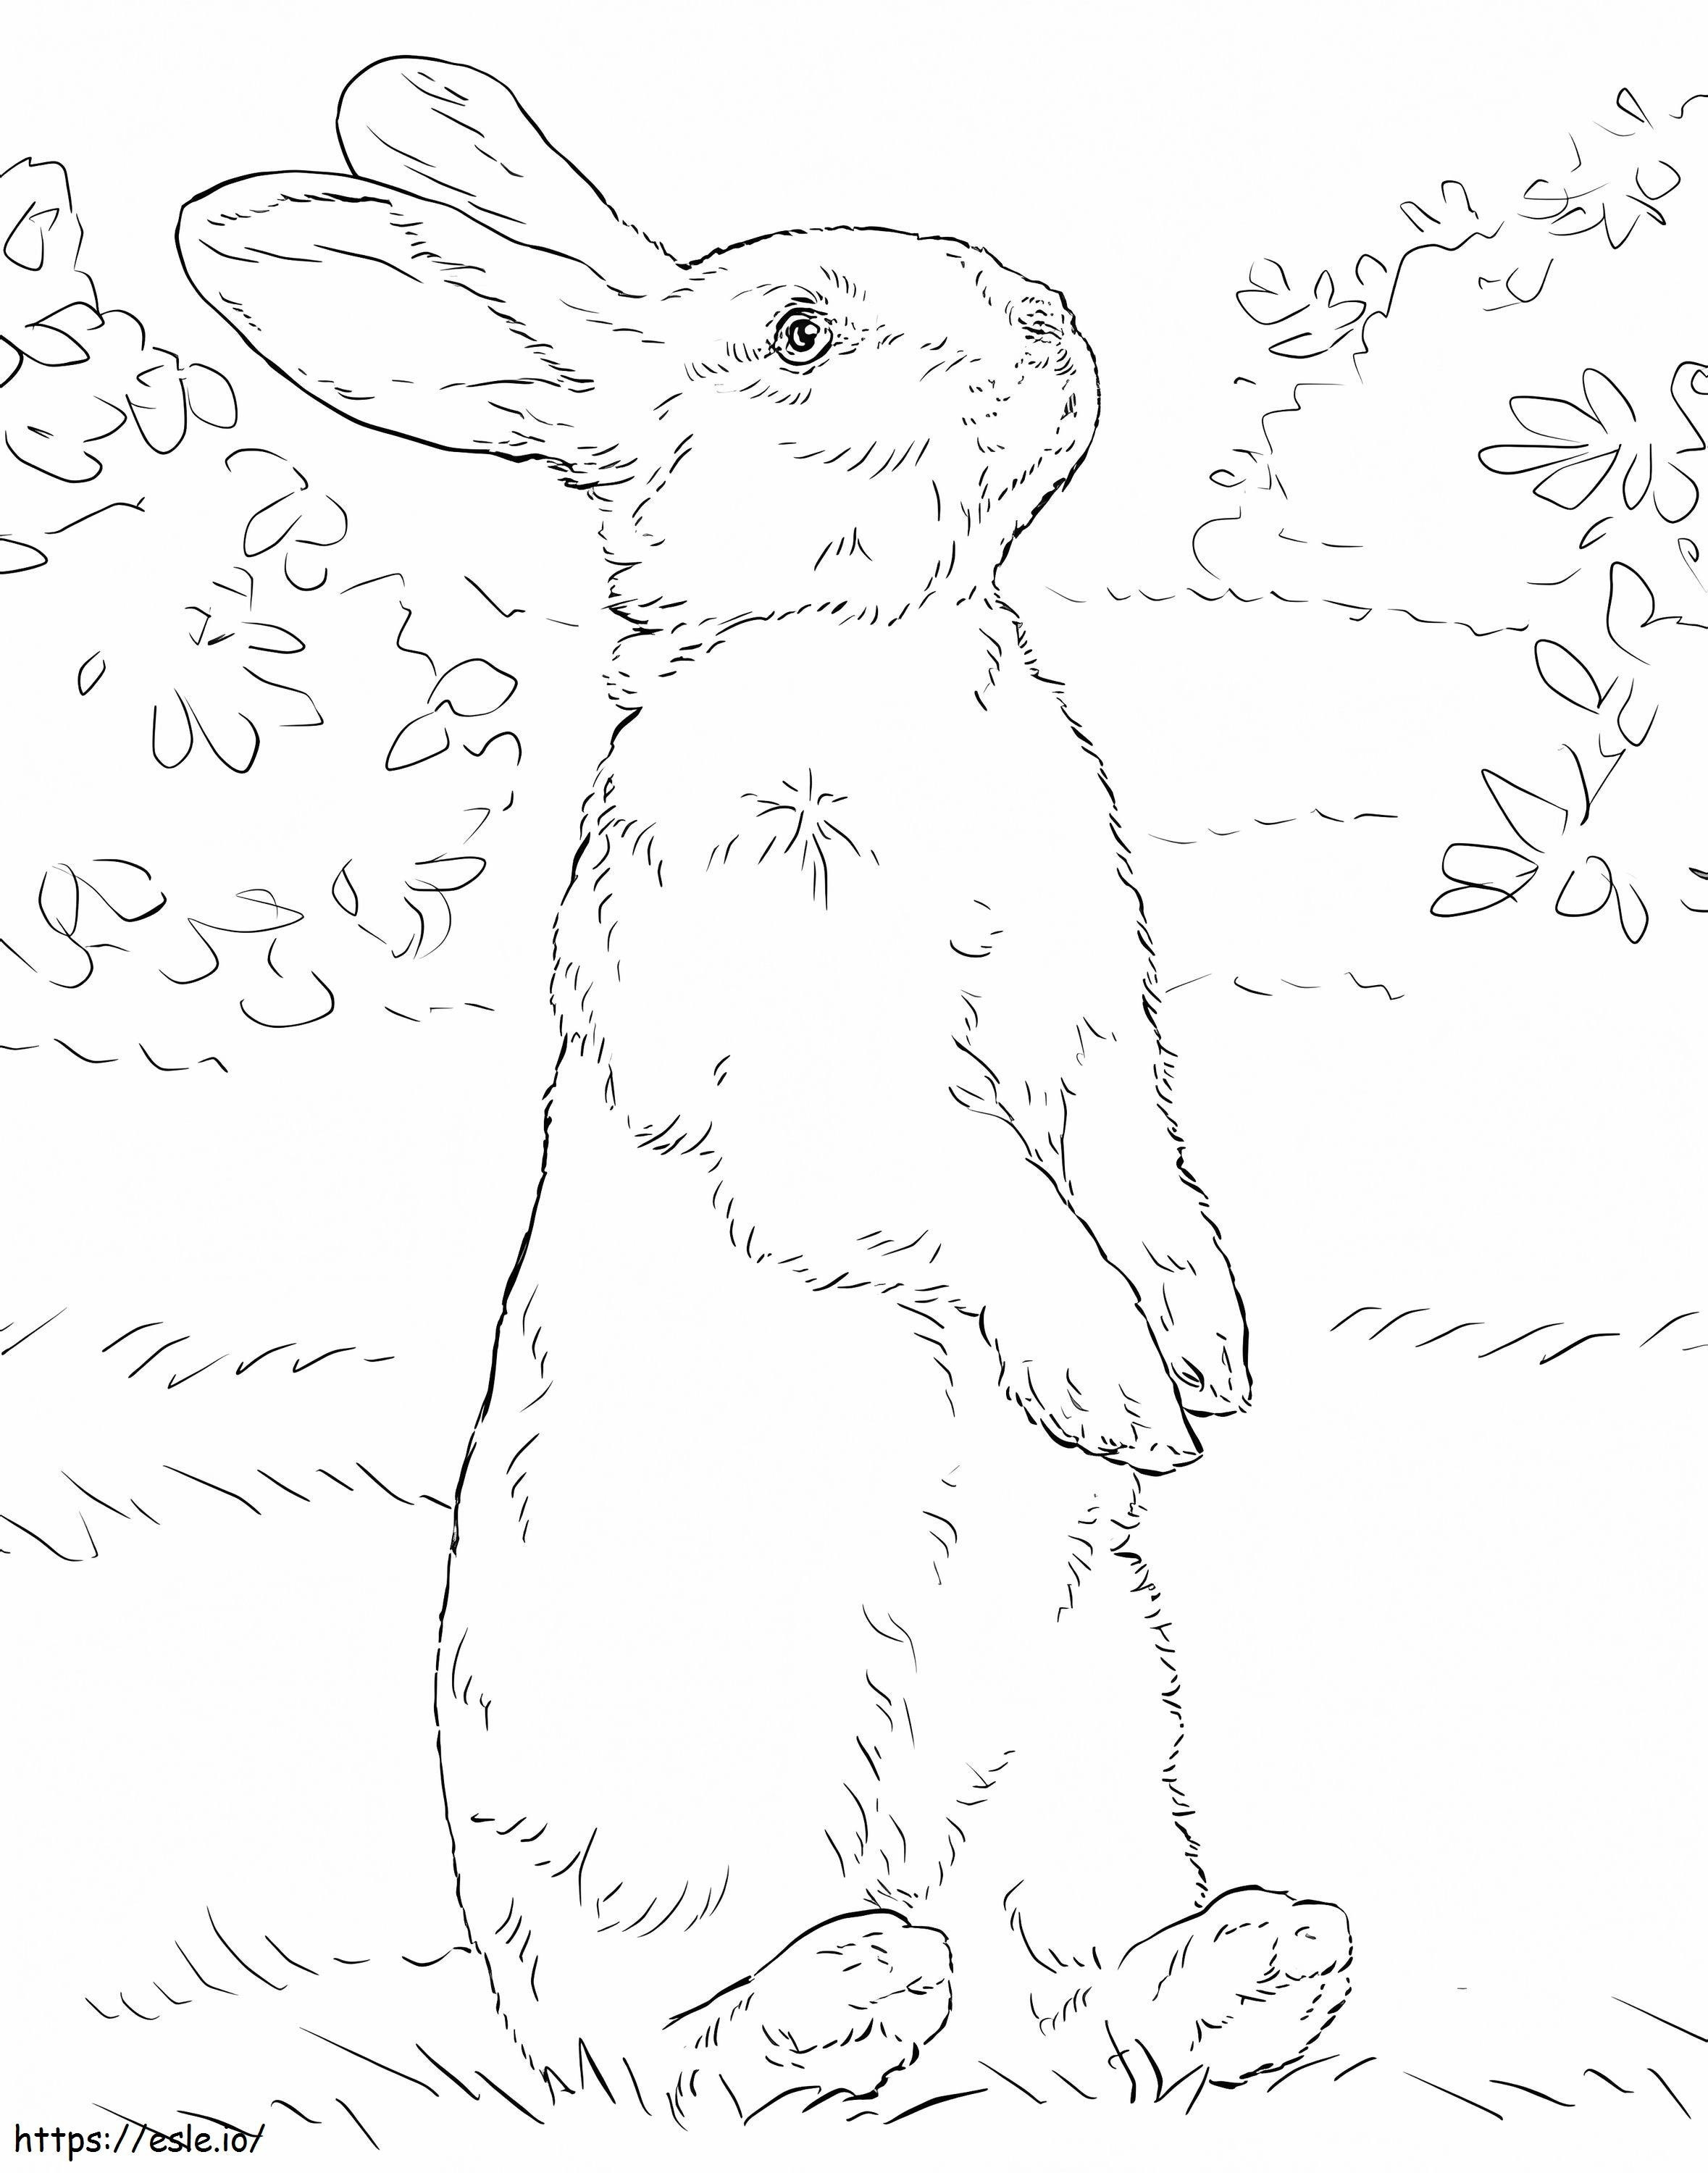 White Rabbit Standing On Its Hind Legs coloring page